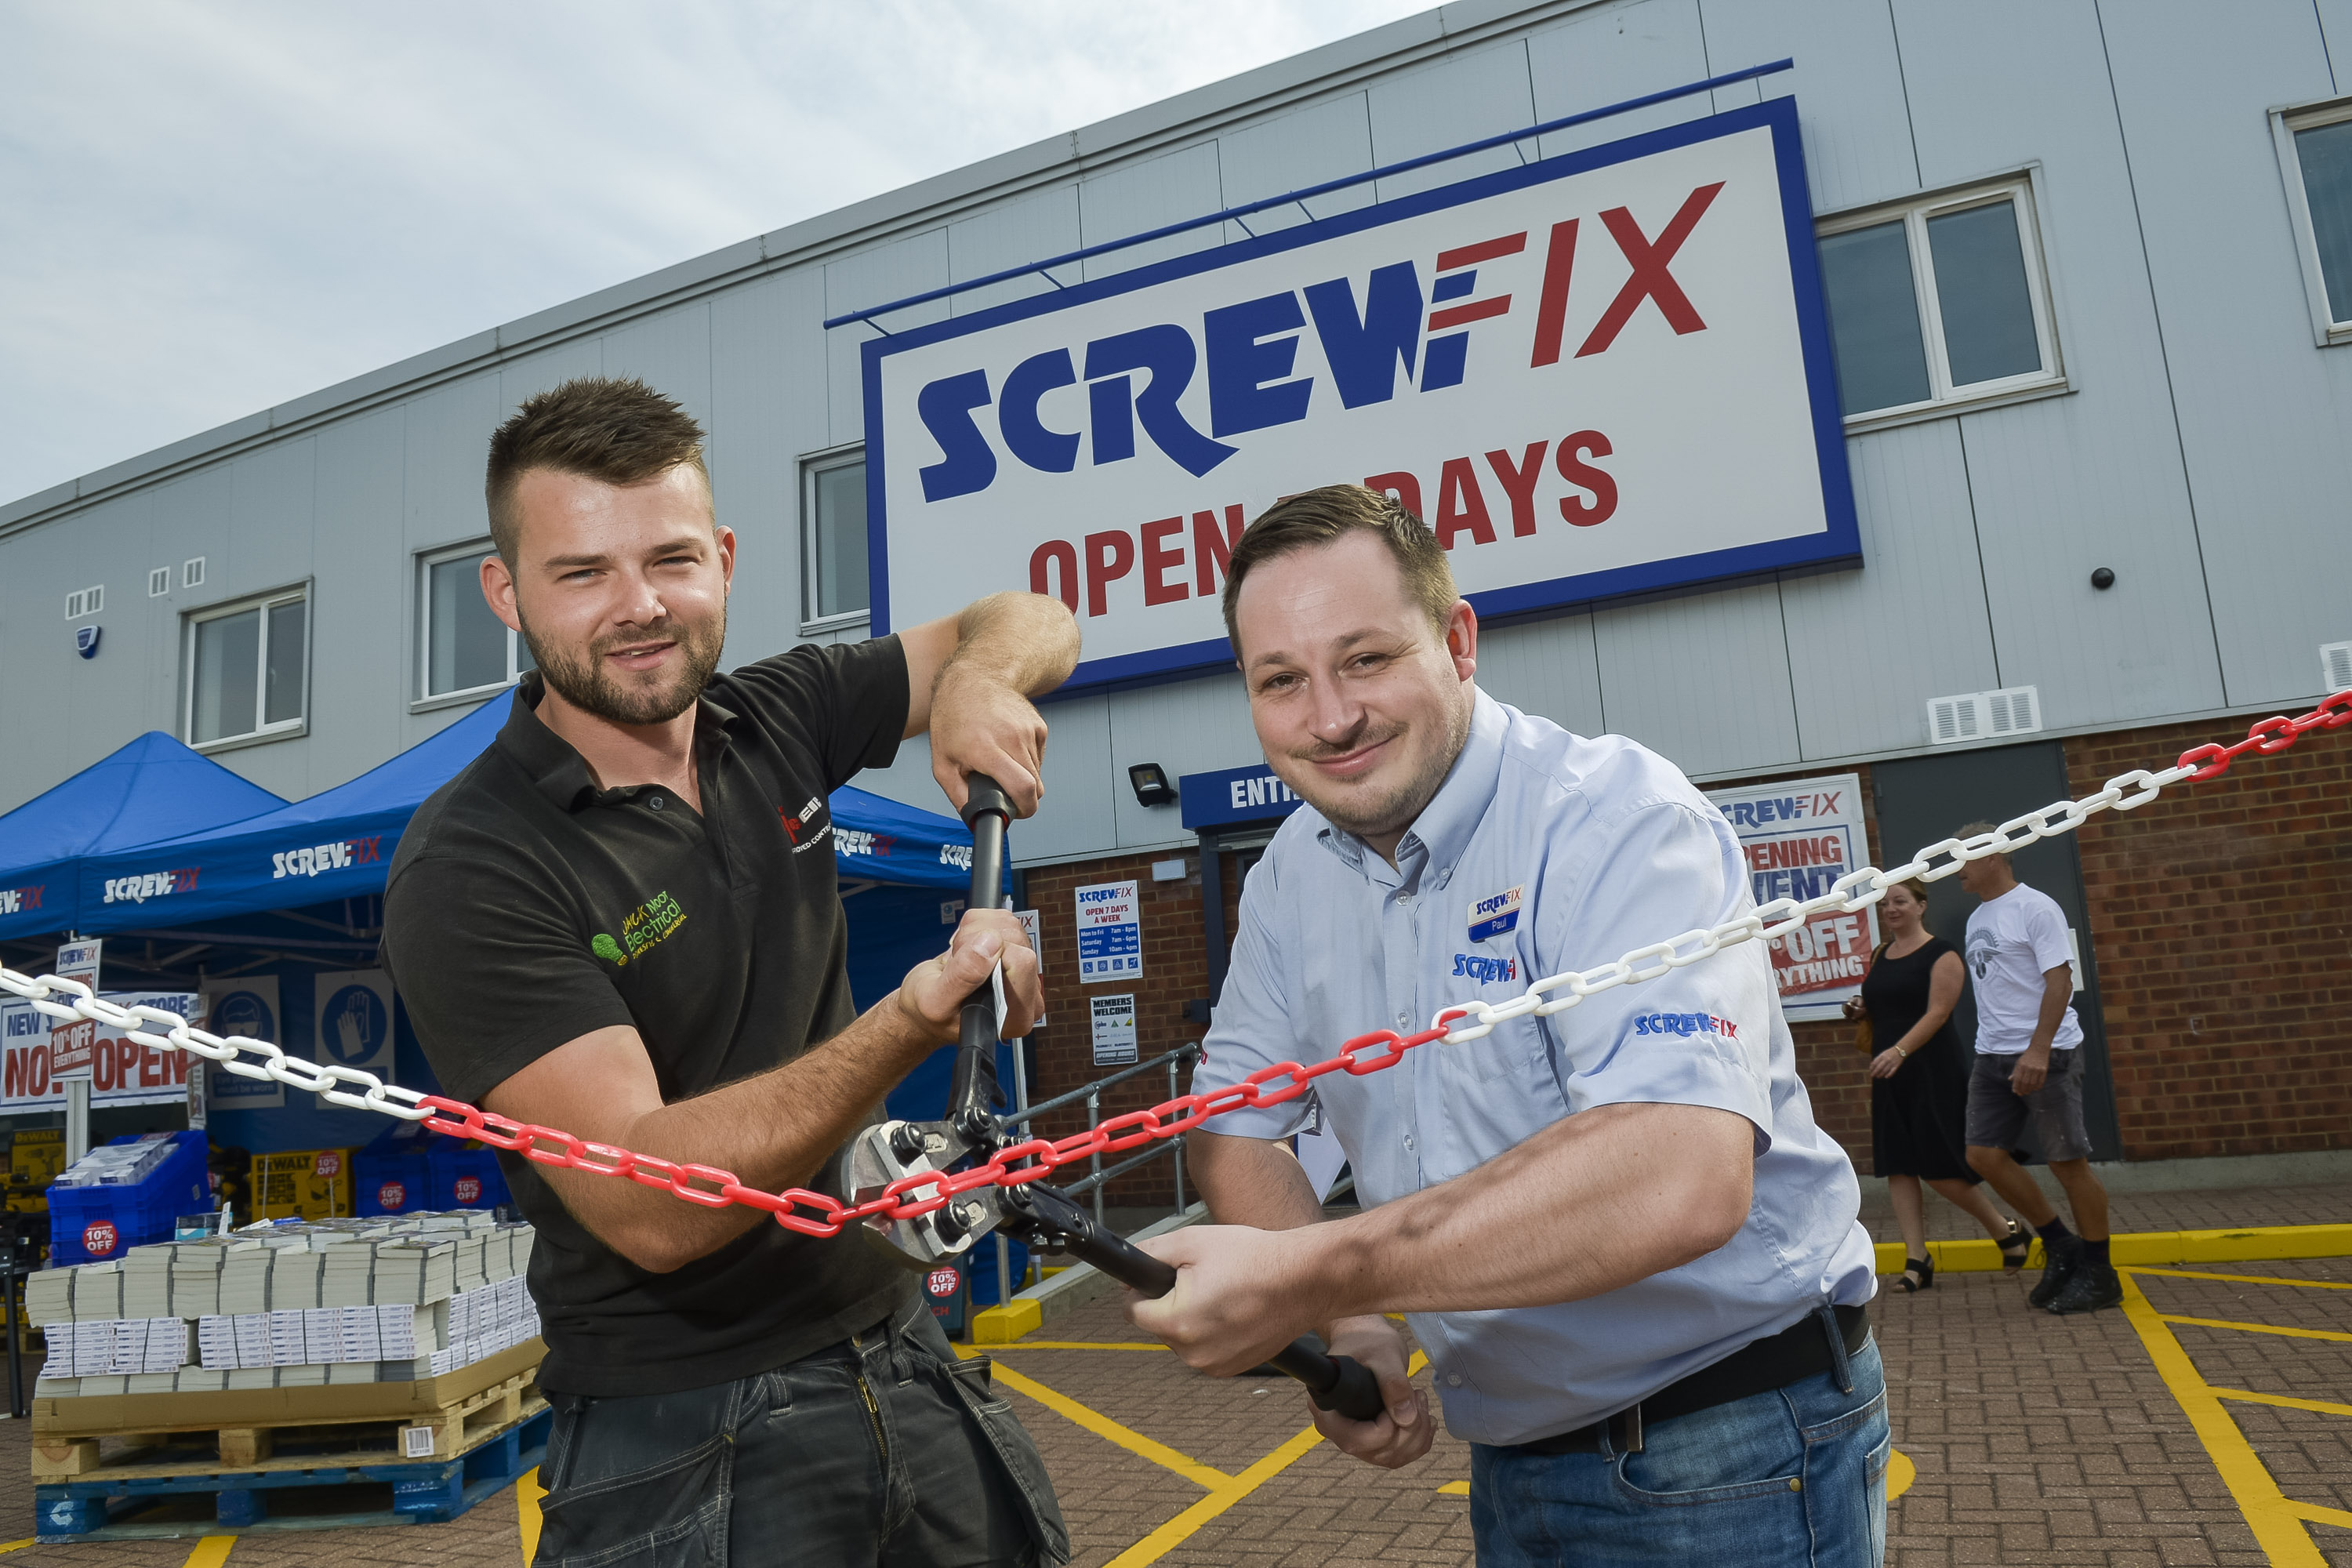 Whitstable’s first Screwfix store is declared a runaway success